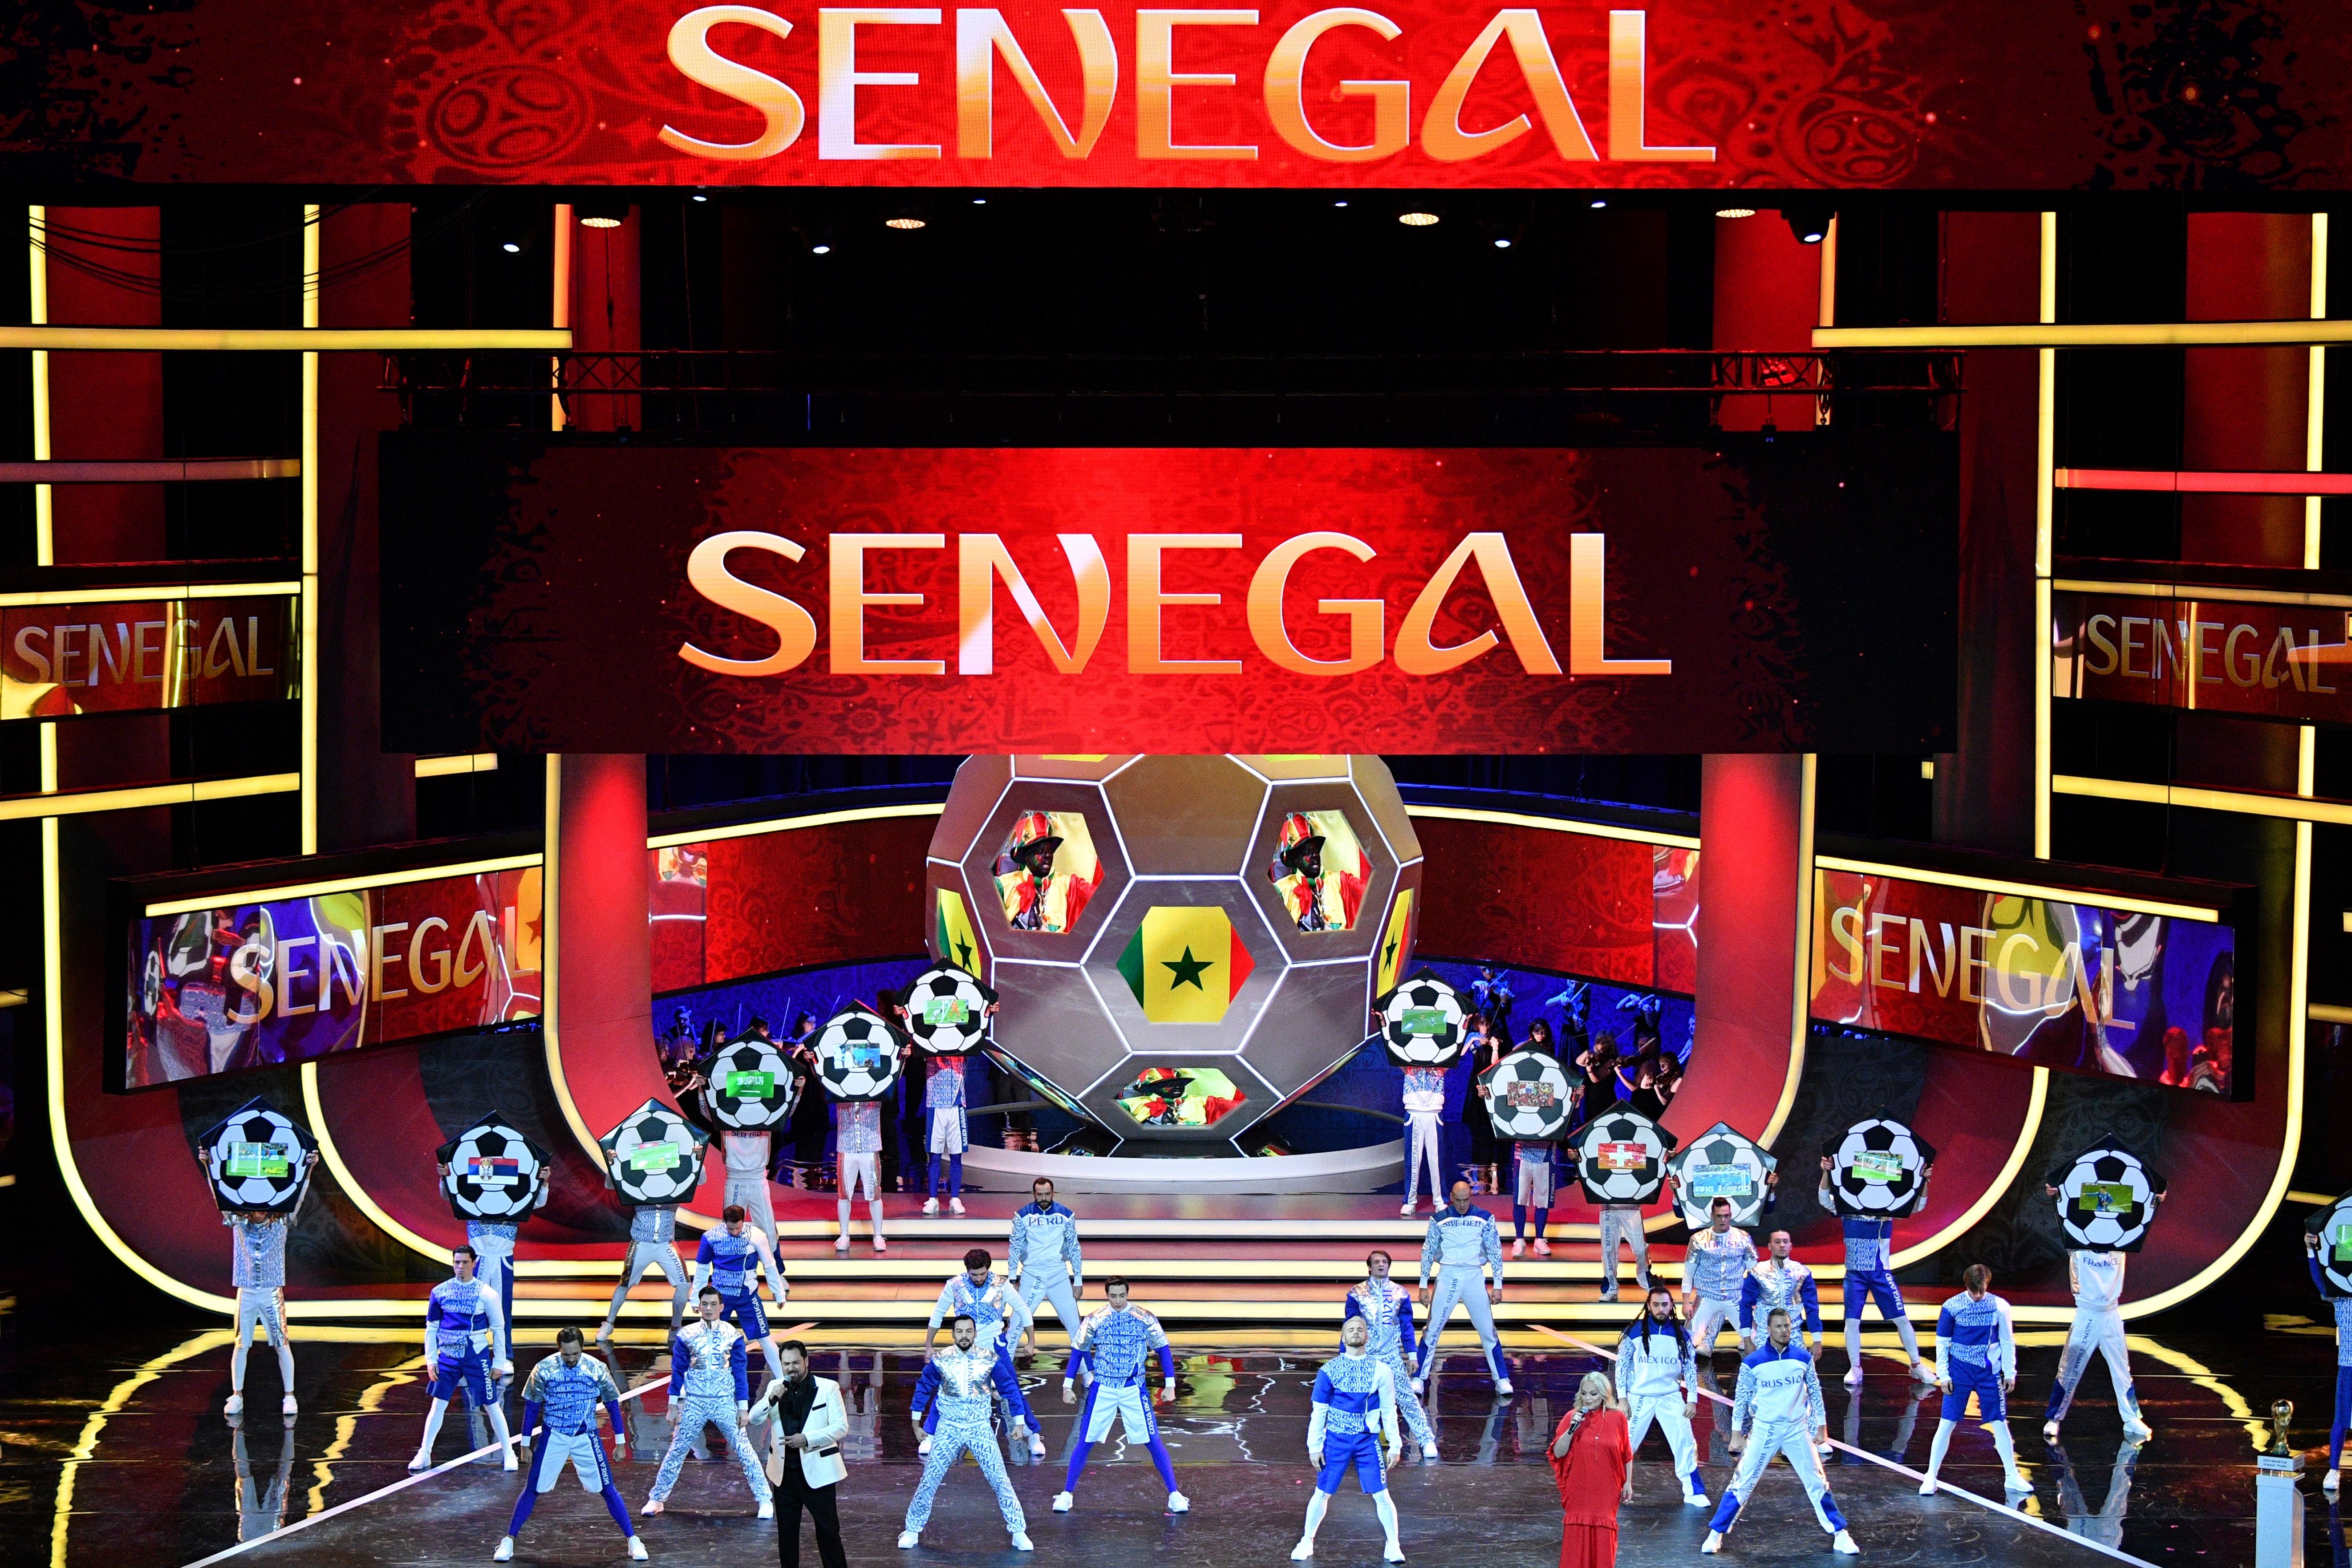 Artists perform on stage as "Senegal" is displayed on screens during the Final Draw for the 2018 FIFA World Cup football tournament at the State Kremlin Palace in Moscow on December 1, 2017.
The 2018 FIFA World Cup will be held from June 14 and July 15, 2018, in 11 Russian cities. / AFP PHOTO / Mladen ANTONOV        (Photo credit should read MLADEN ANTONOV/AFP/Getty Images)